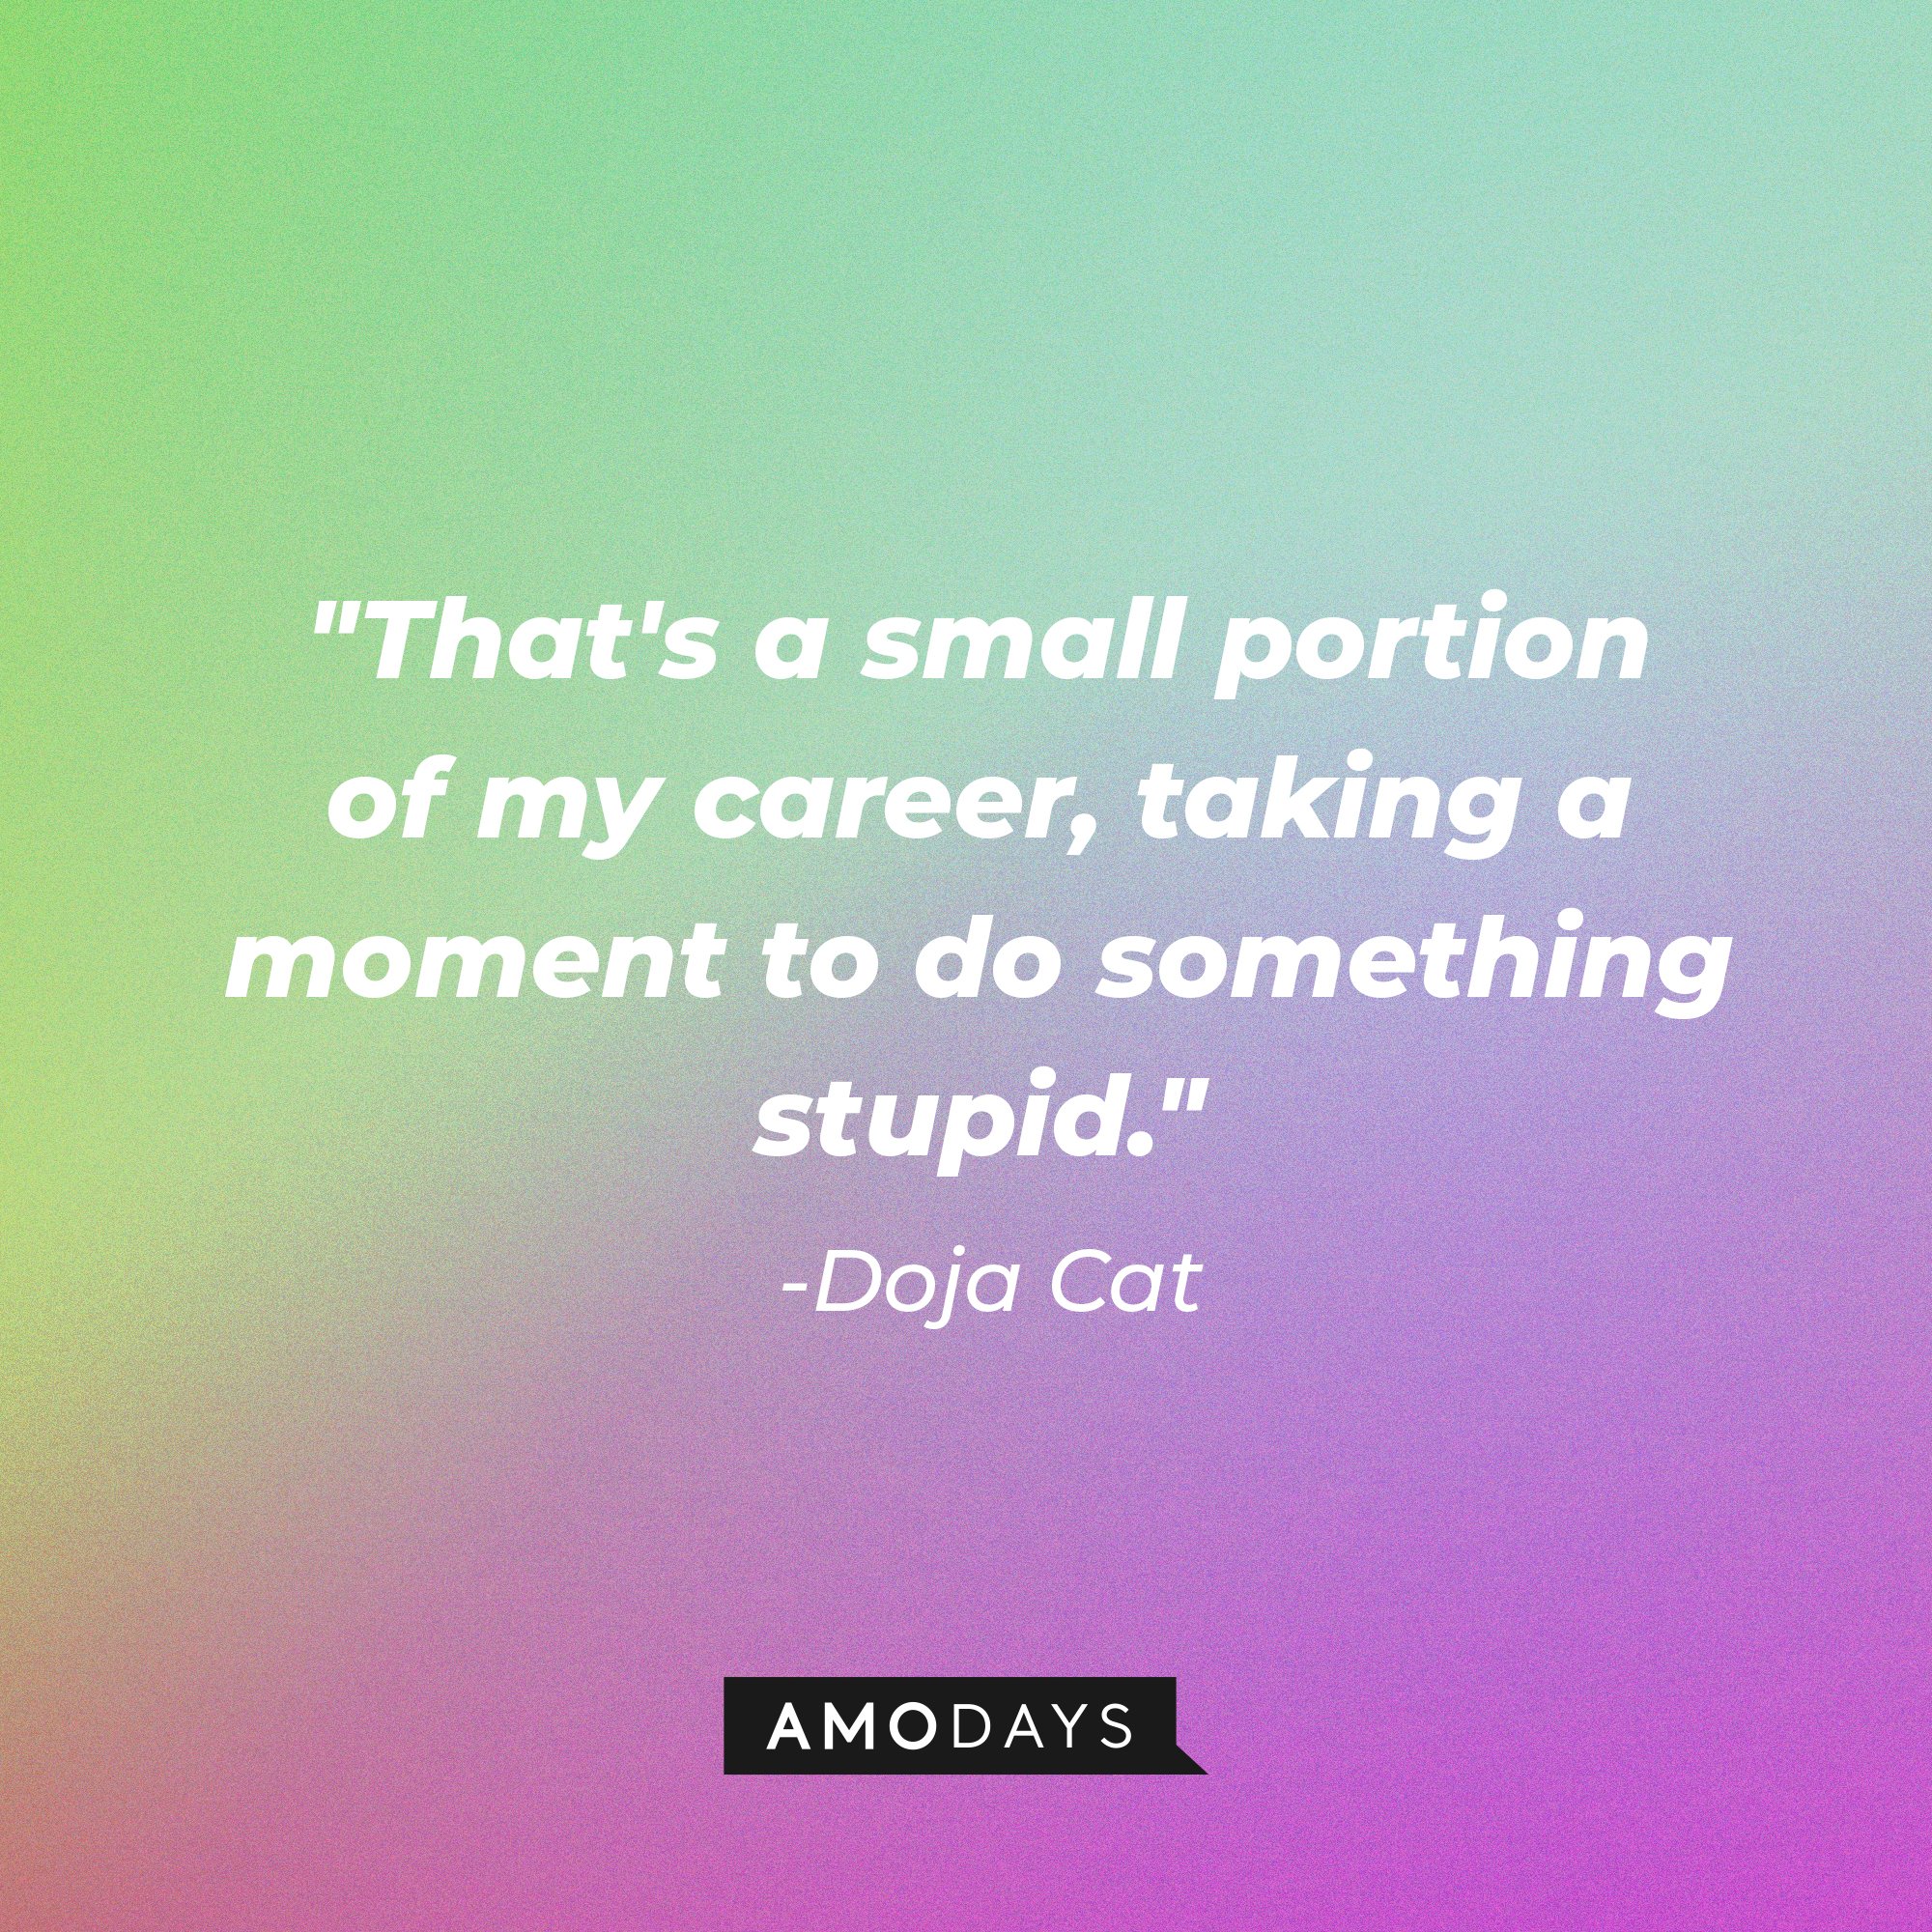 Doja Cat's quote: "That's a small portion of my career, taking a moment to do something stupid." | Image: AmoDays